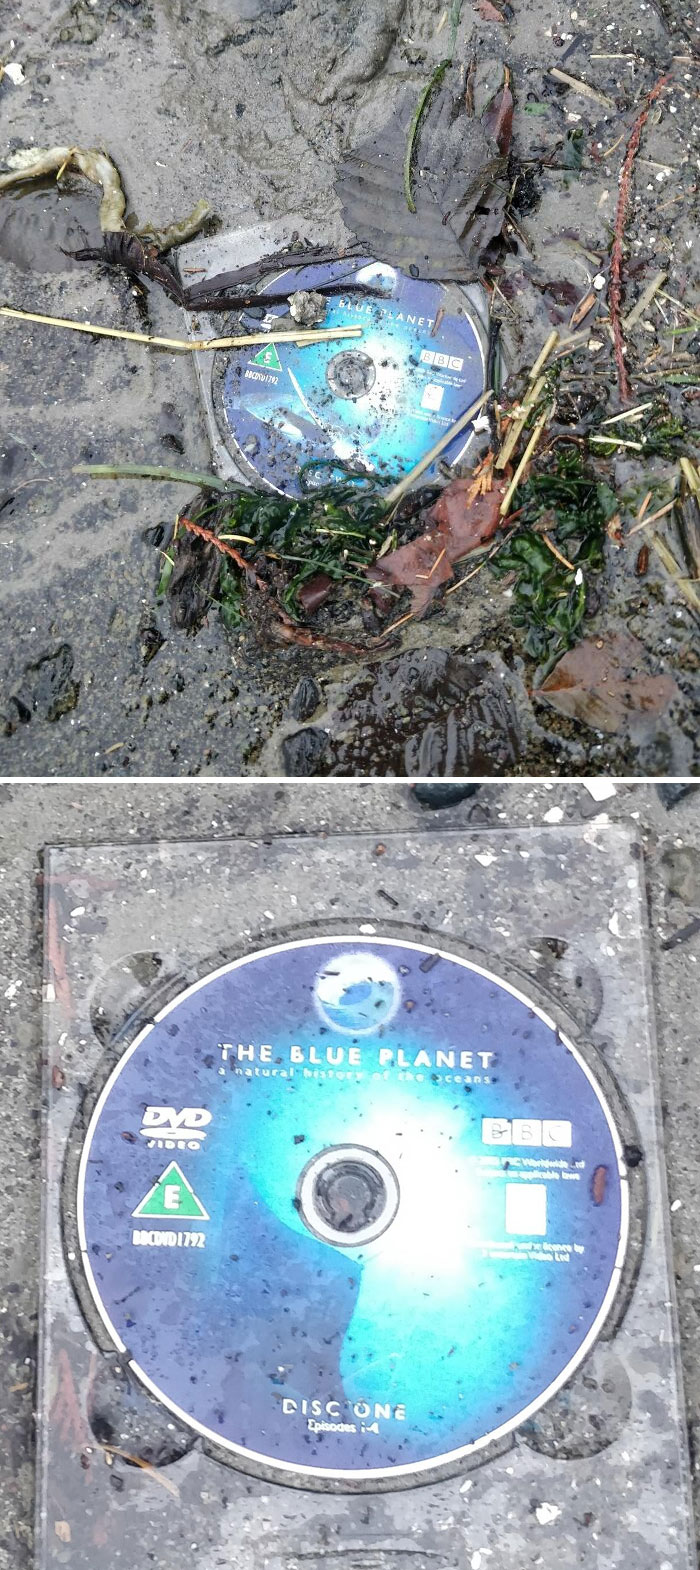 Picking Up Plastic On The Beach Today... The Irony